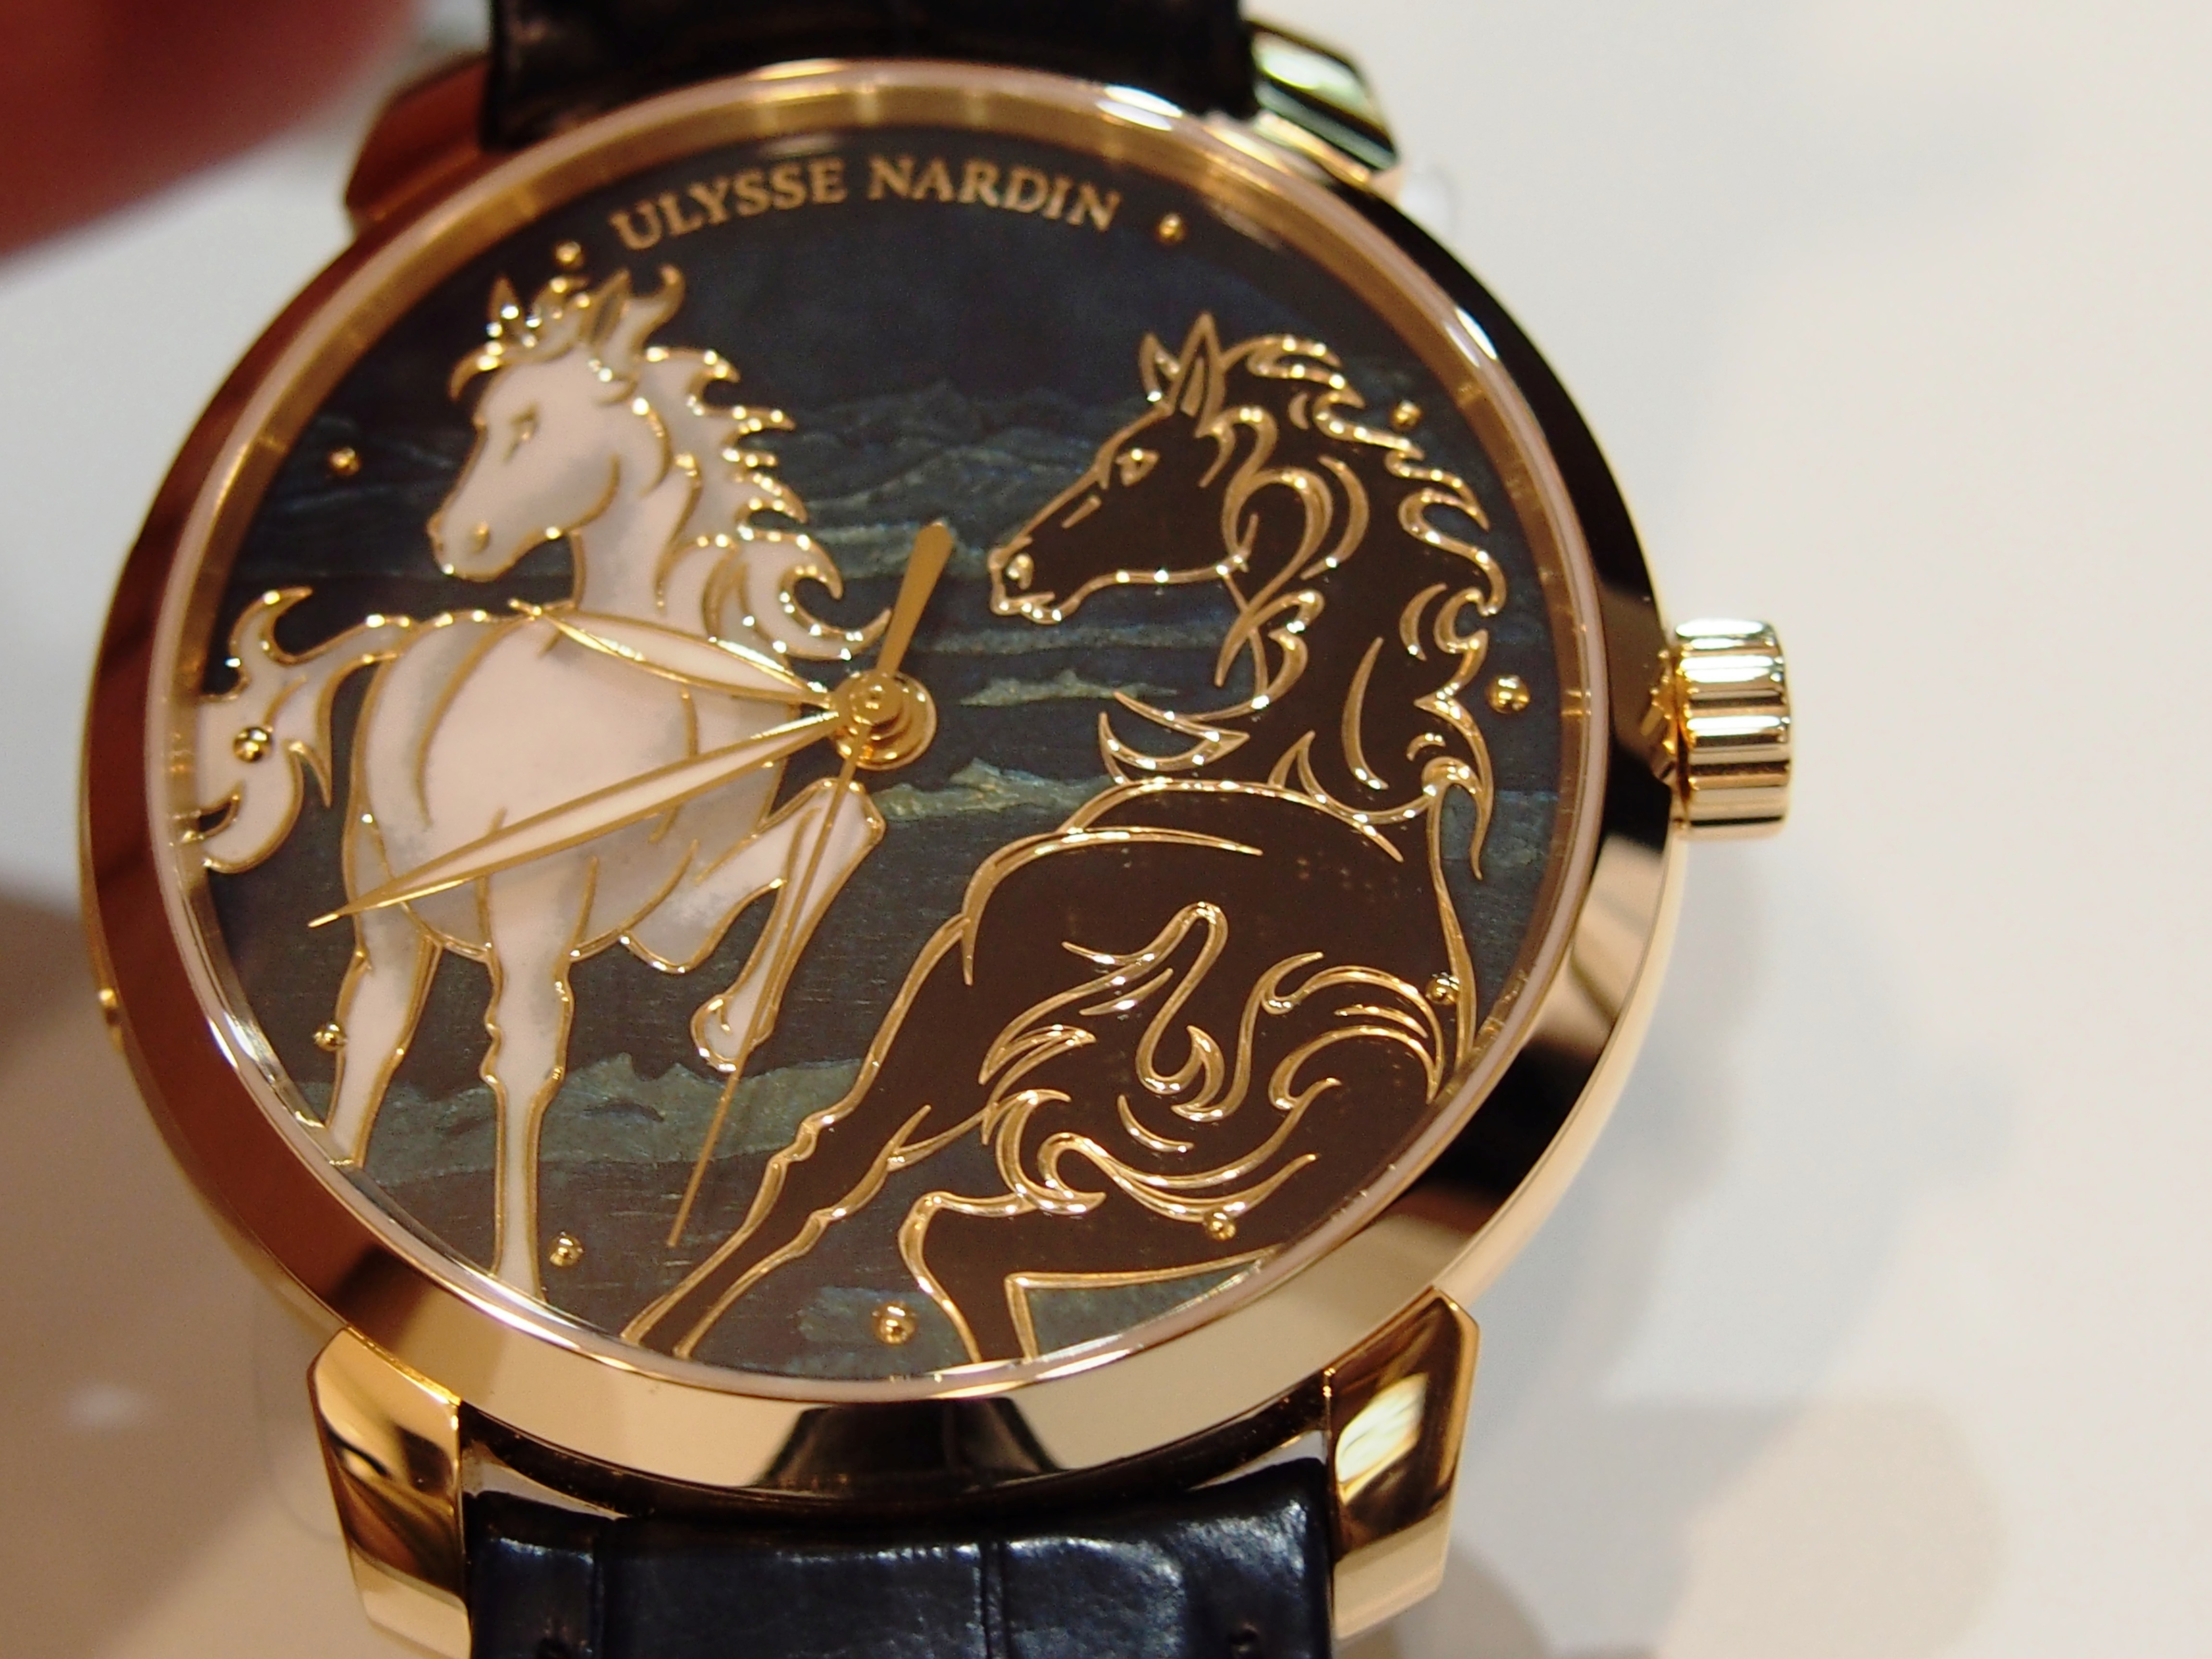 The Ulysse Nardin Classico Horse features an individually hand-enameled dial. 